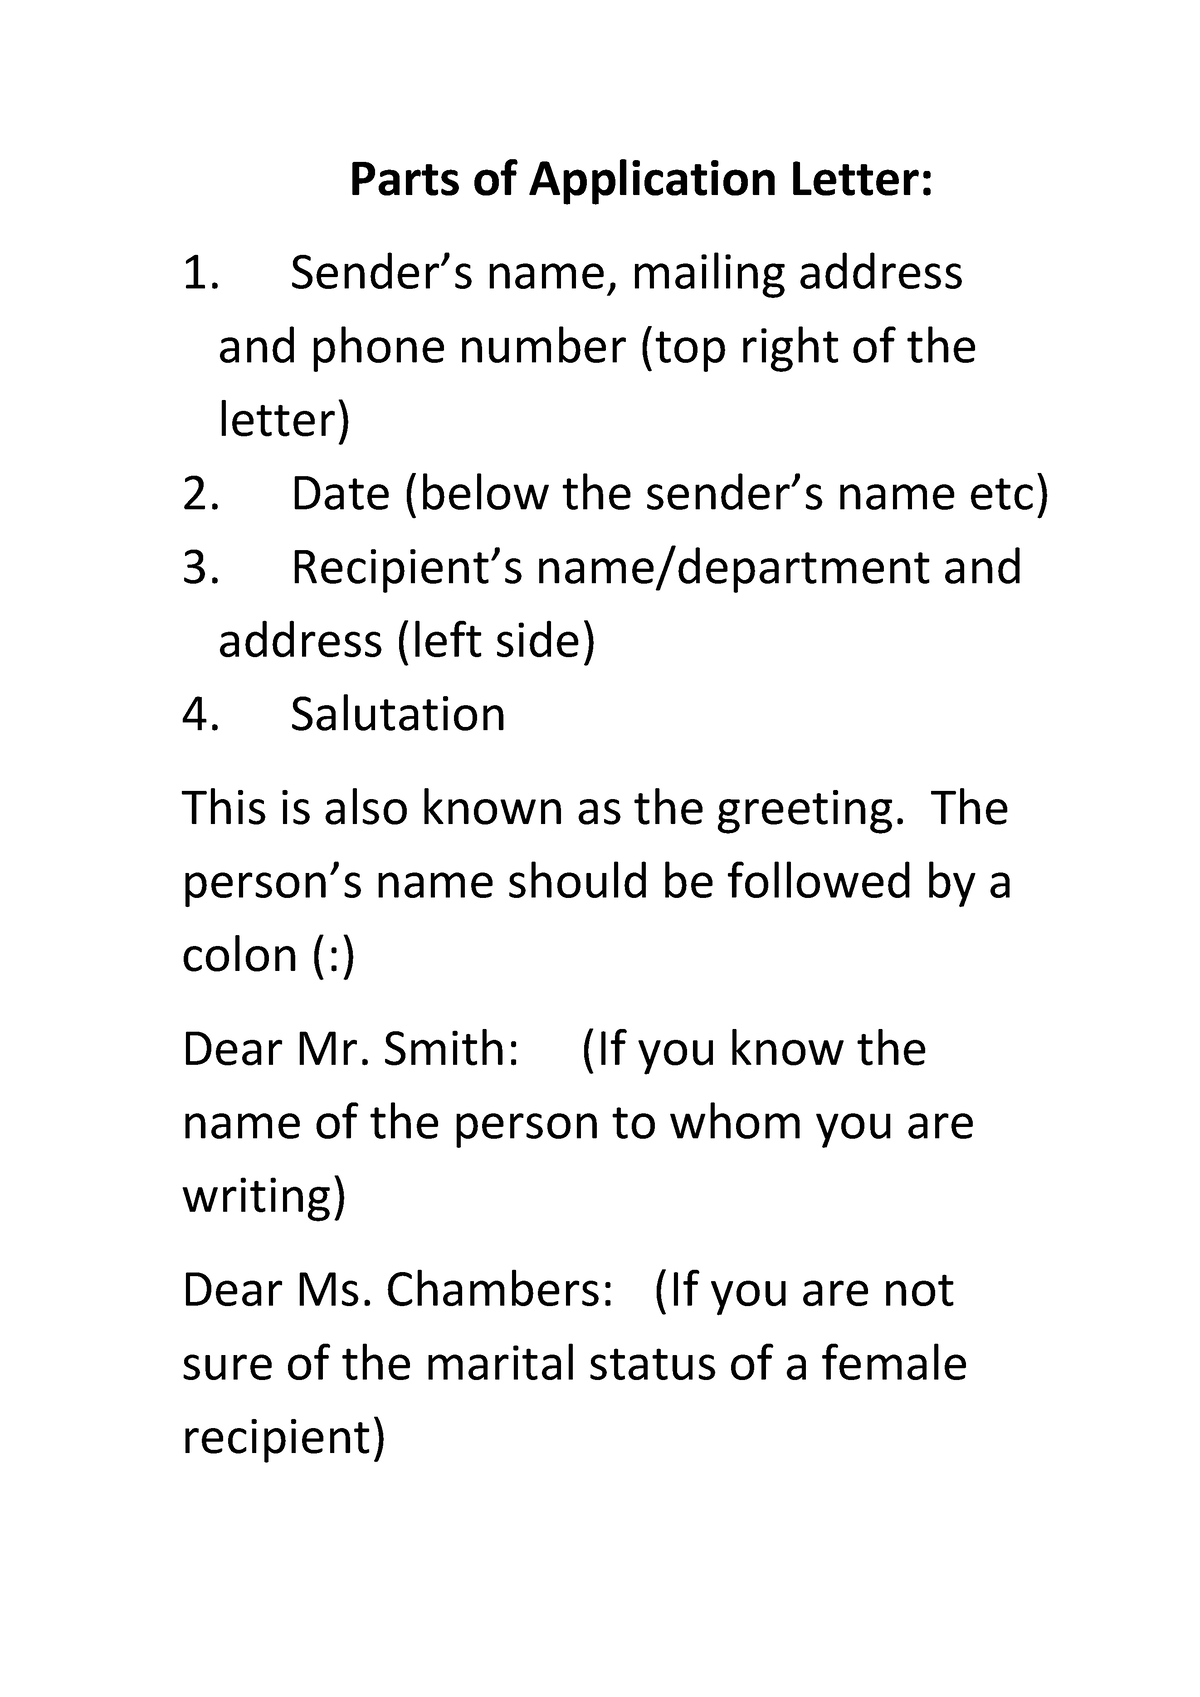 6 parts of application letter